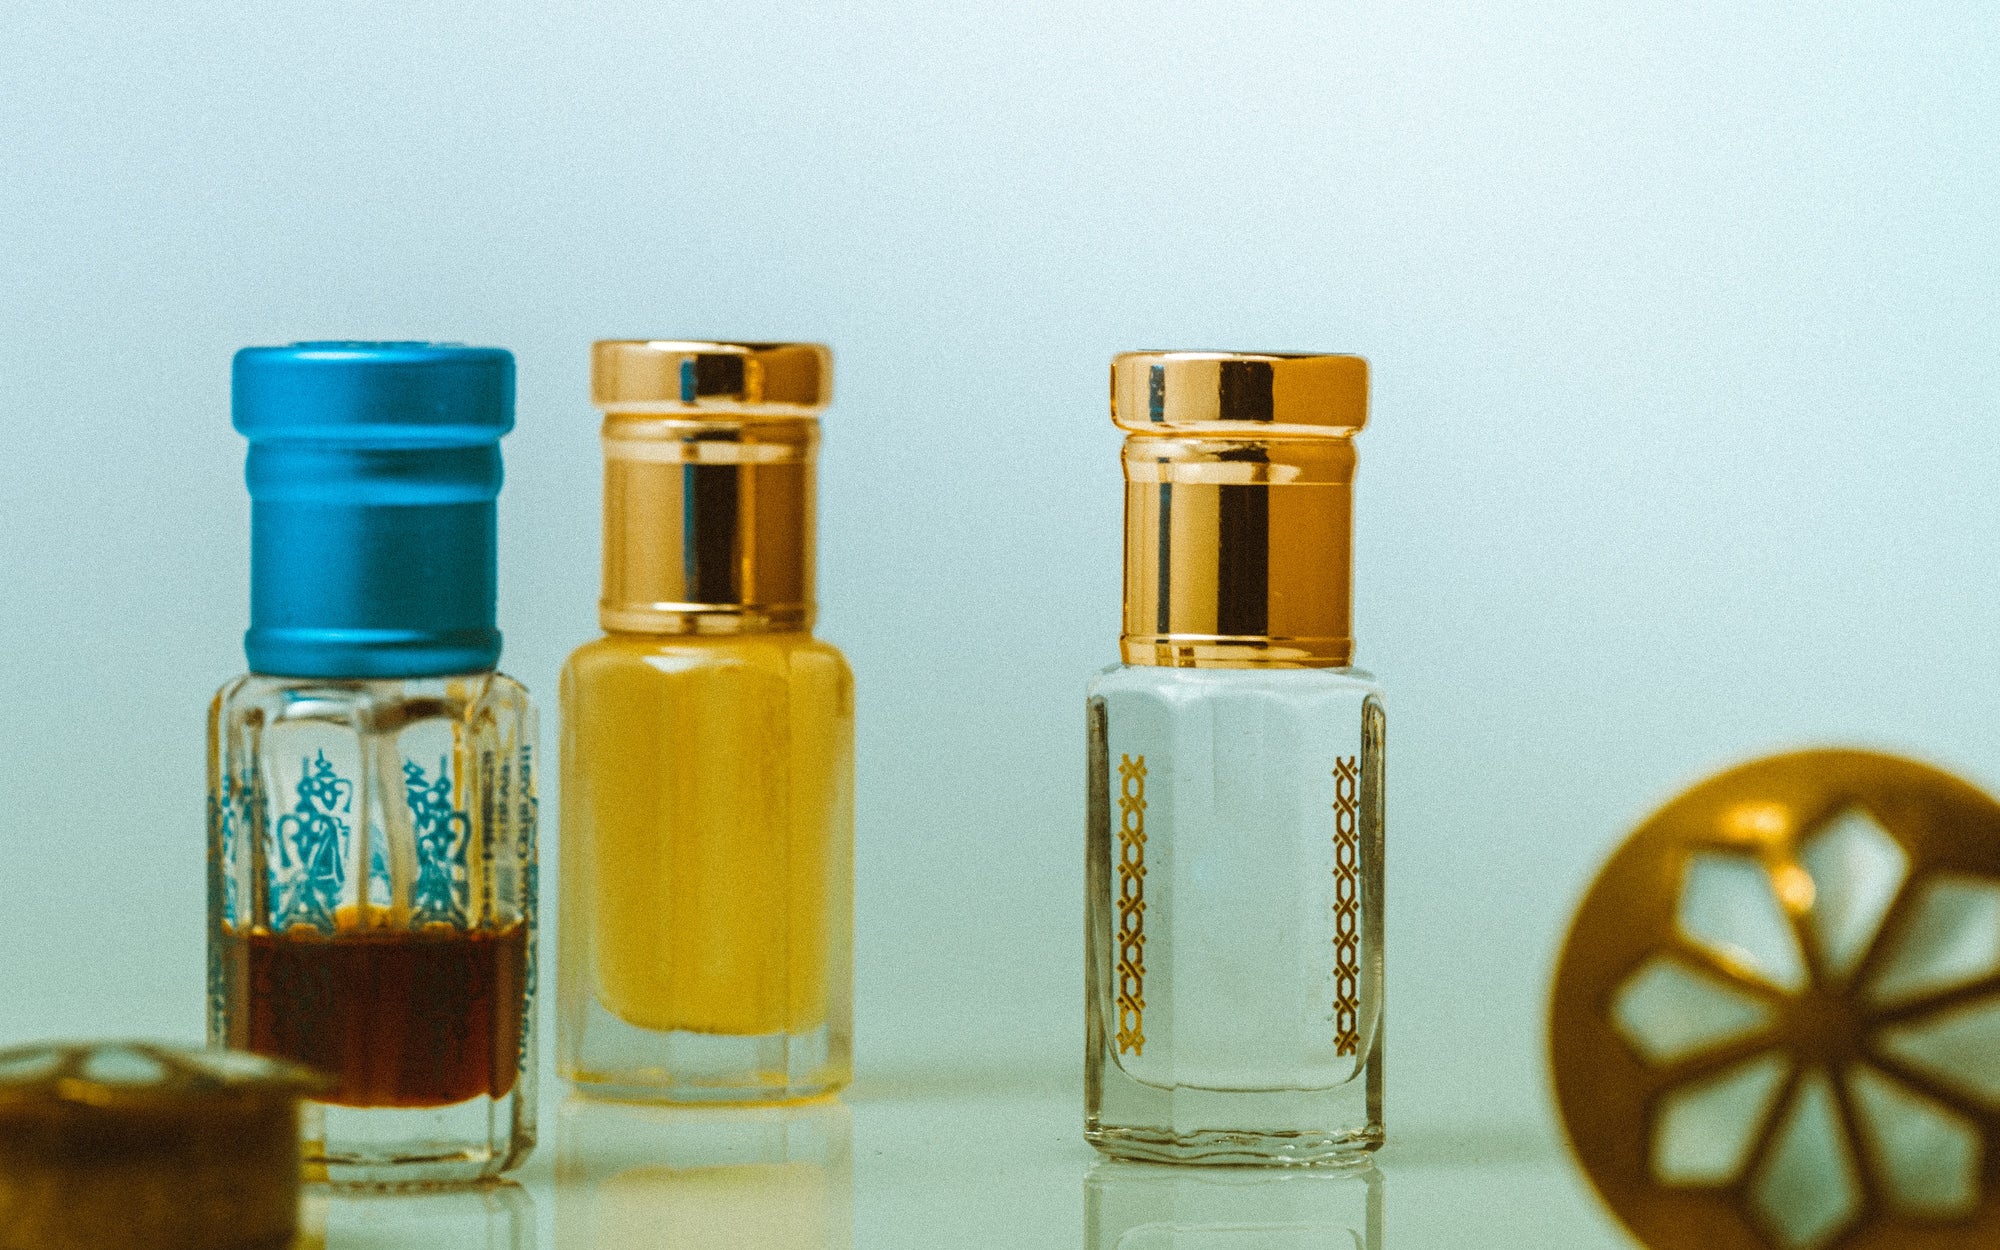 How to Apply Attar (Concentrated Perfume Oil)